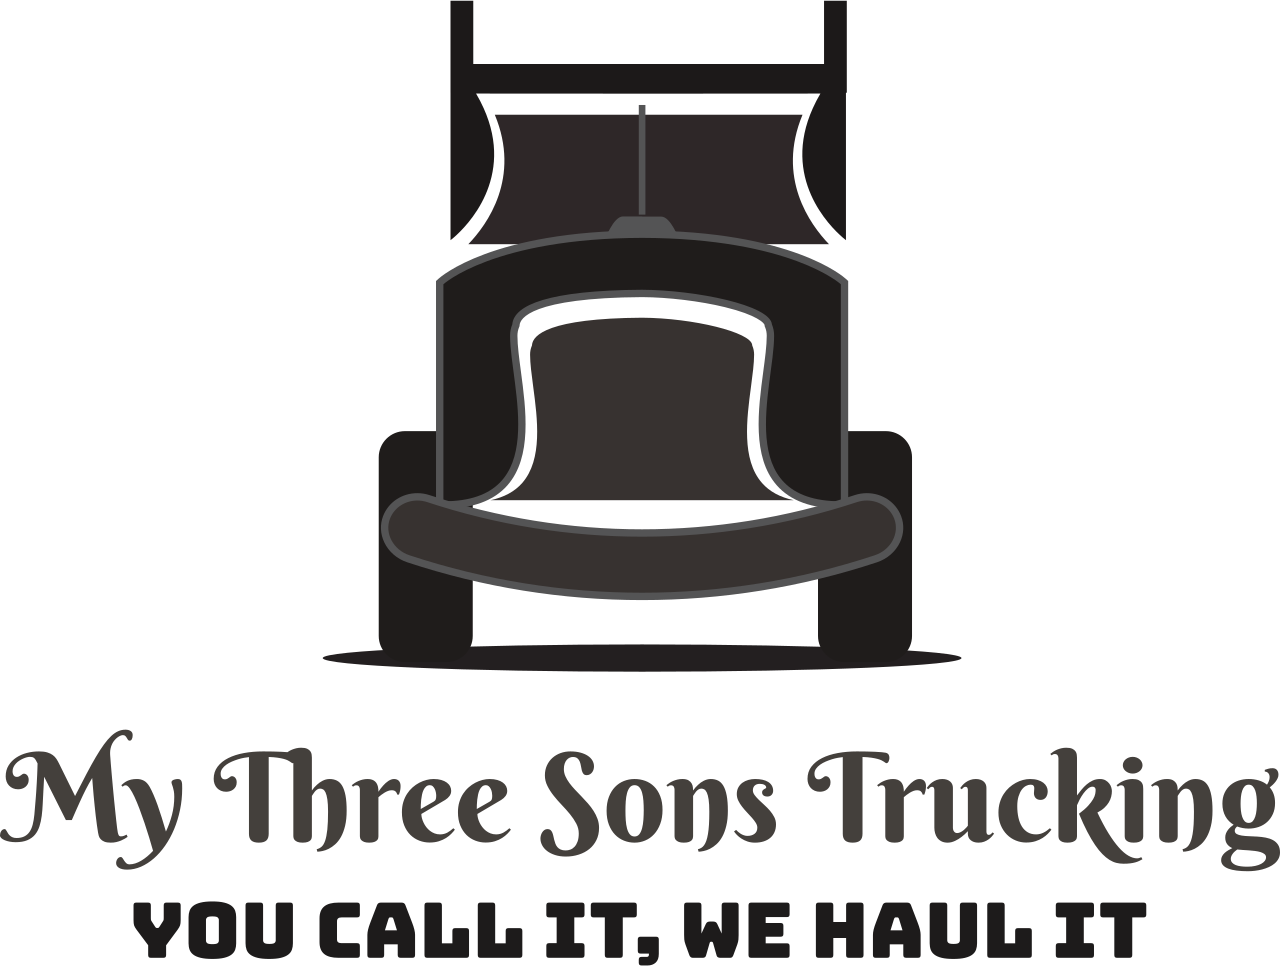 My Three Sons Trucking's web page